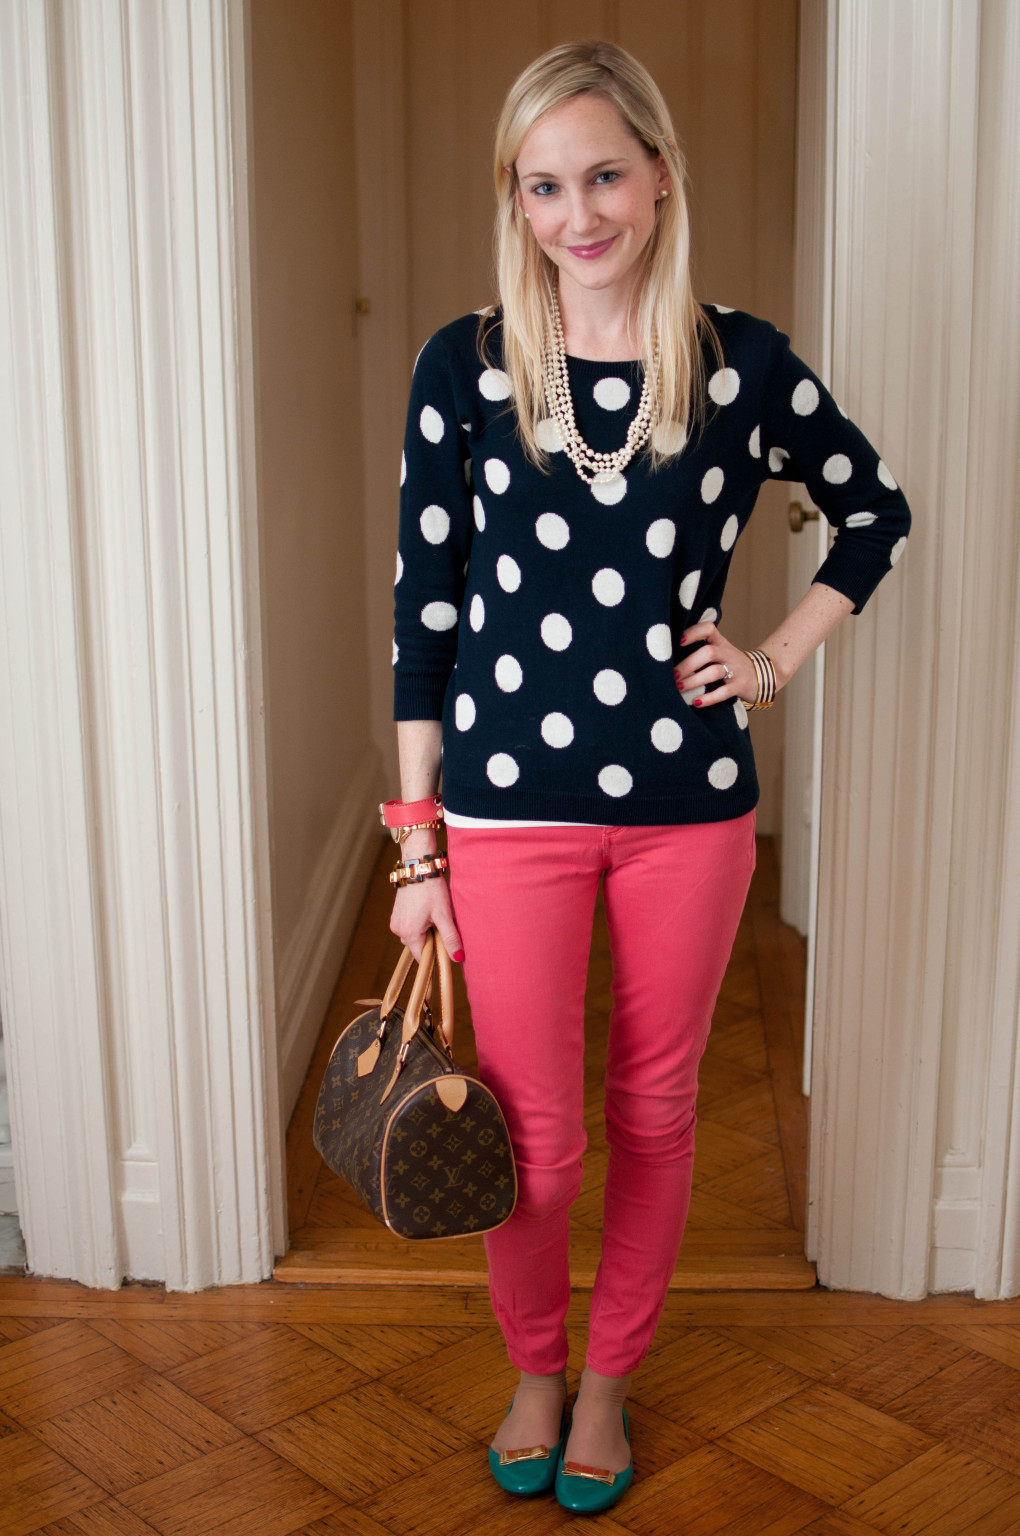 Waiting for the Weekend: Polka Dots and Bright Pink Pants